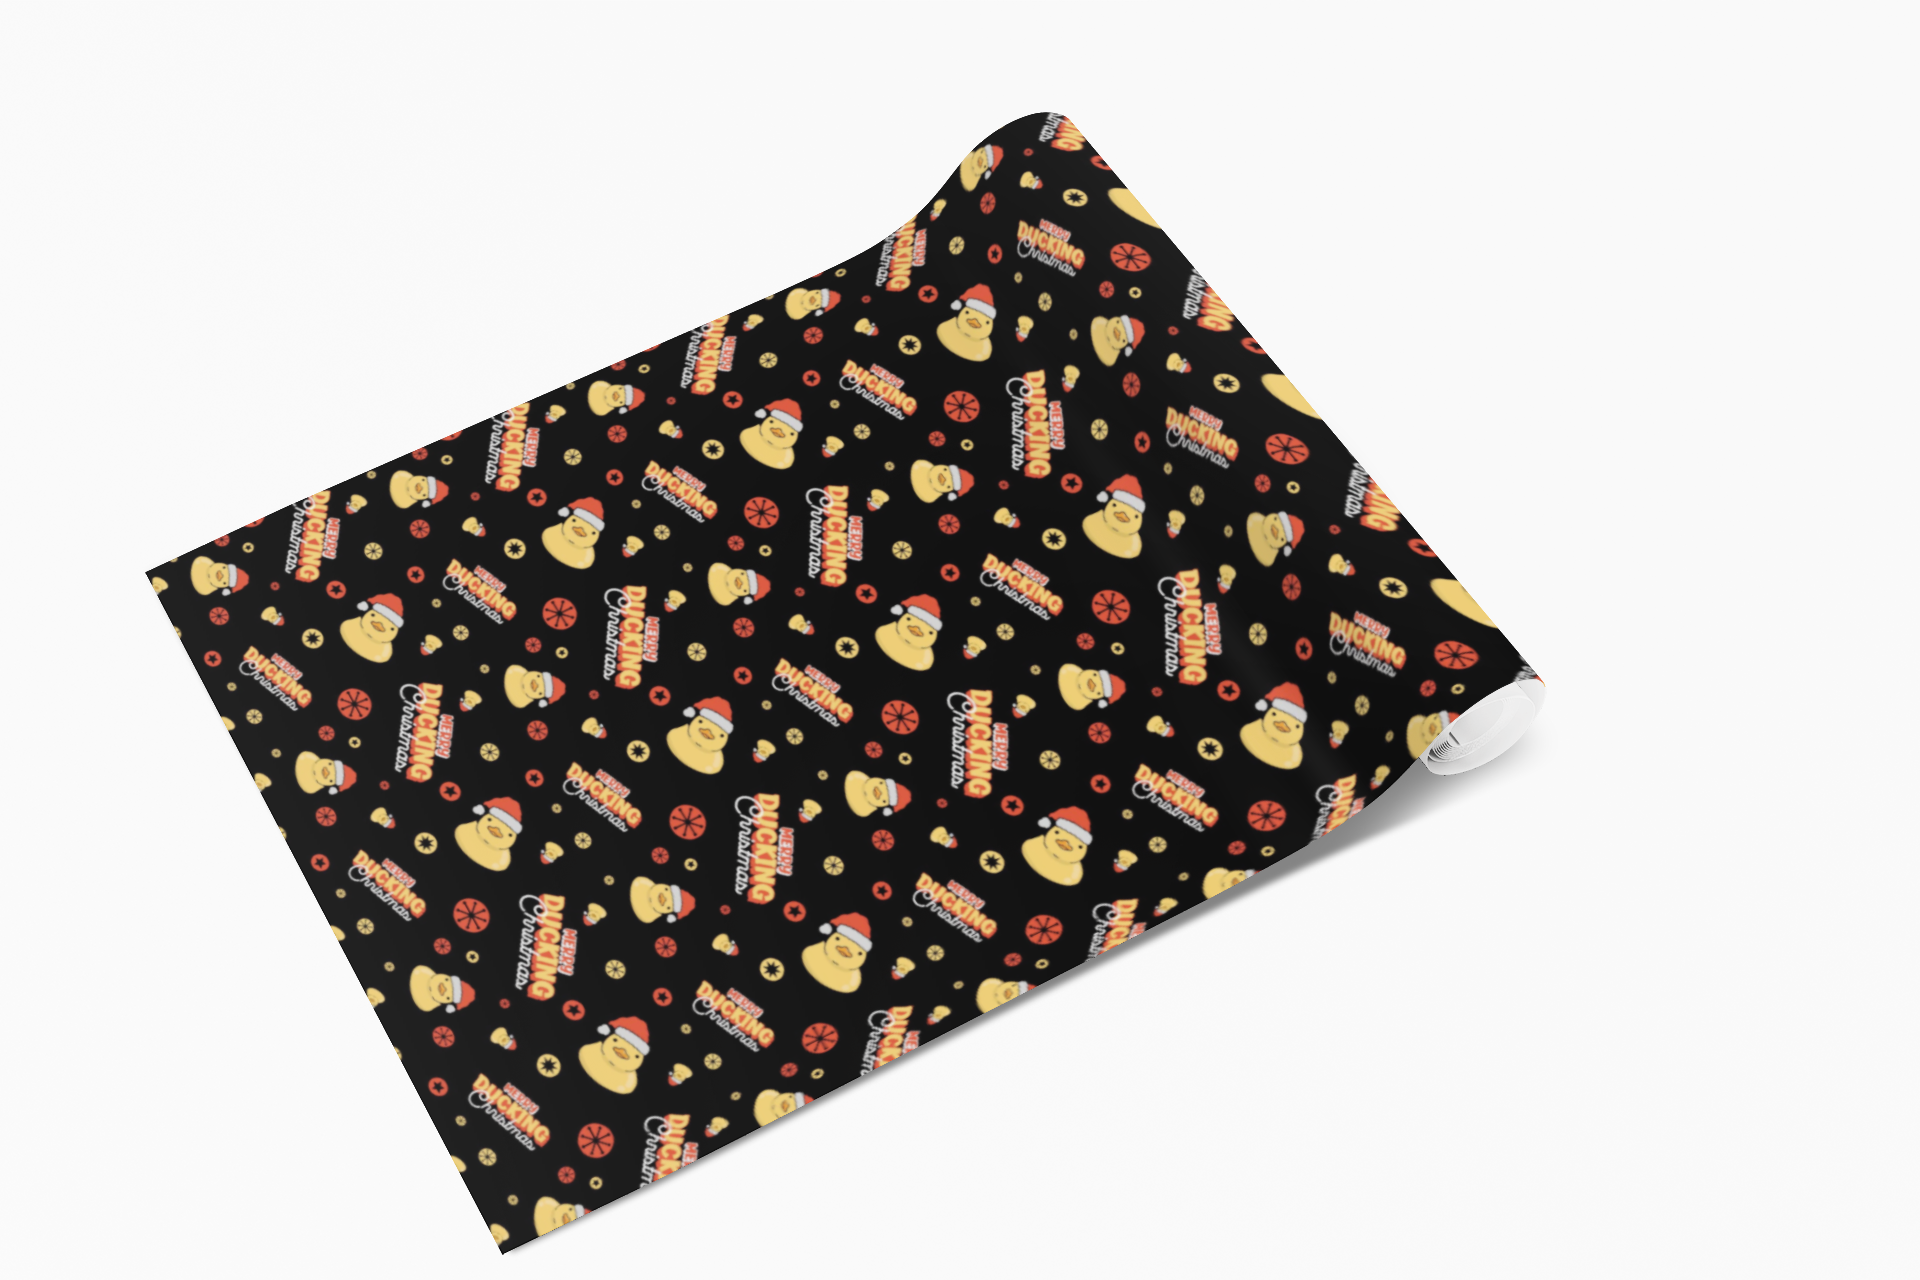 Black Merry Ducking Christmas Wrapping Paper